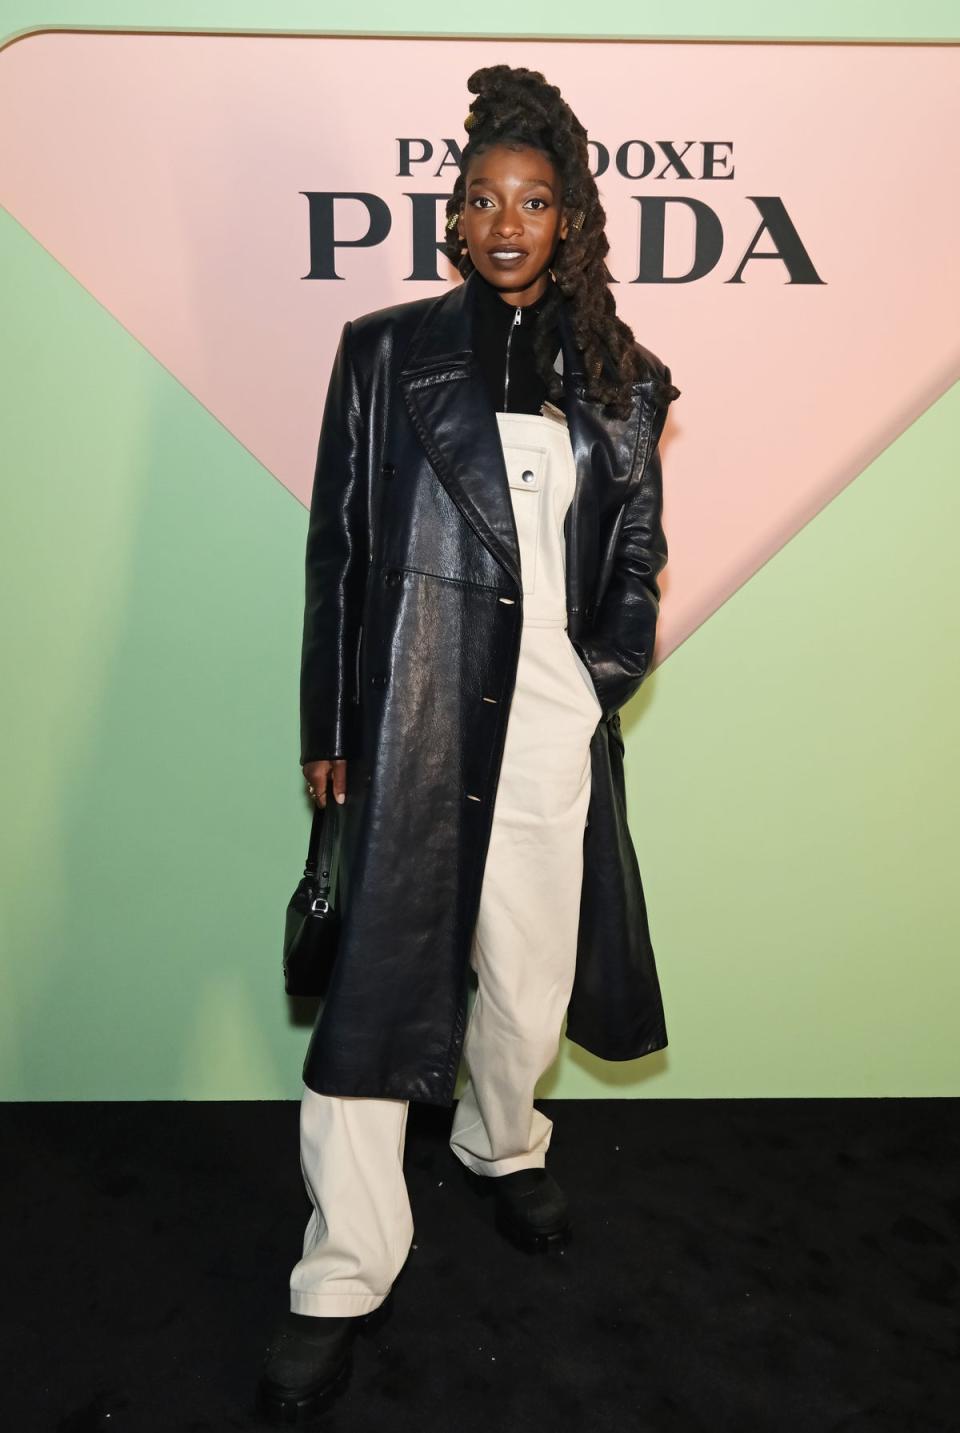 Little Simz attends the Prada Paradoxe fragrance launch party (Dave Benett/Getty Images for Pra)